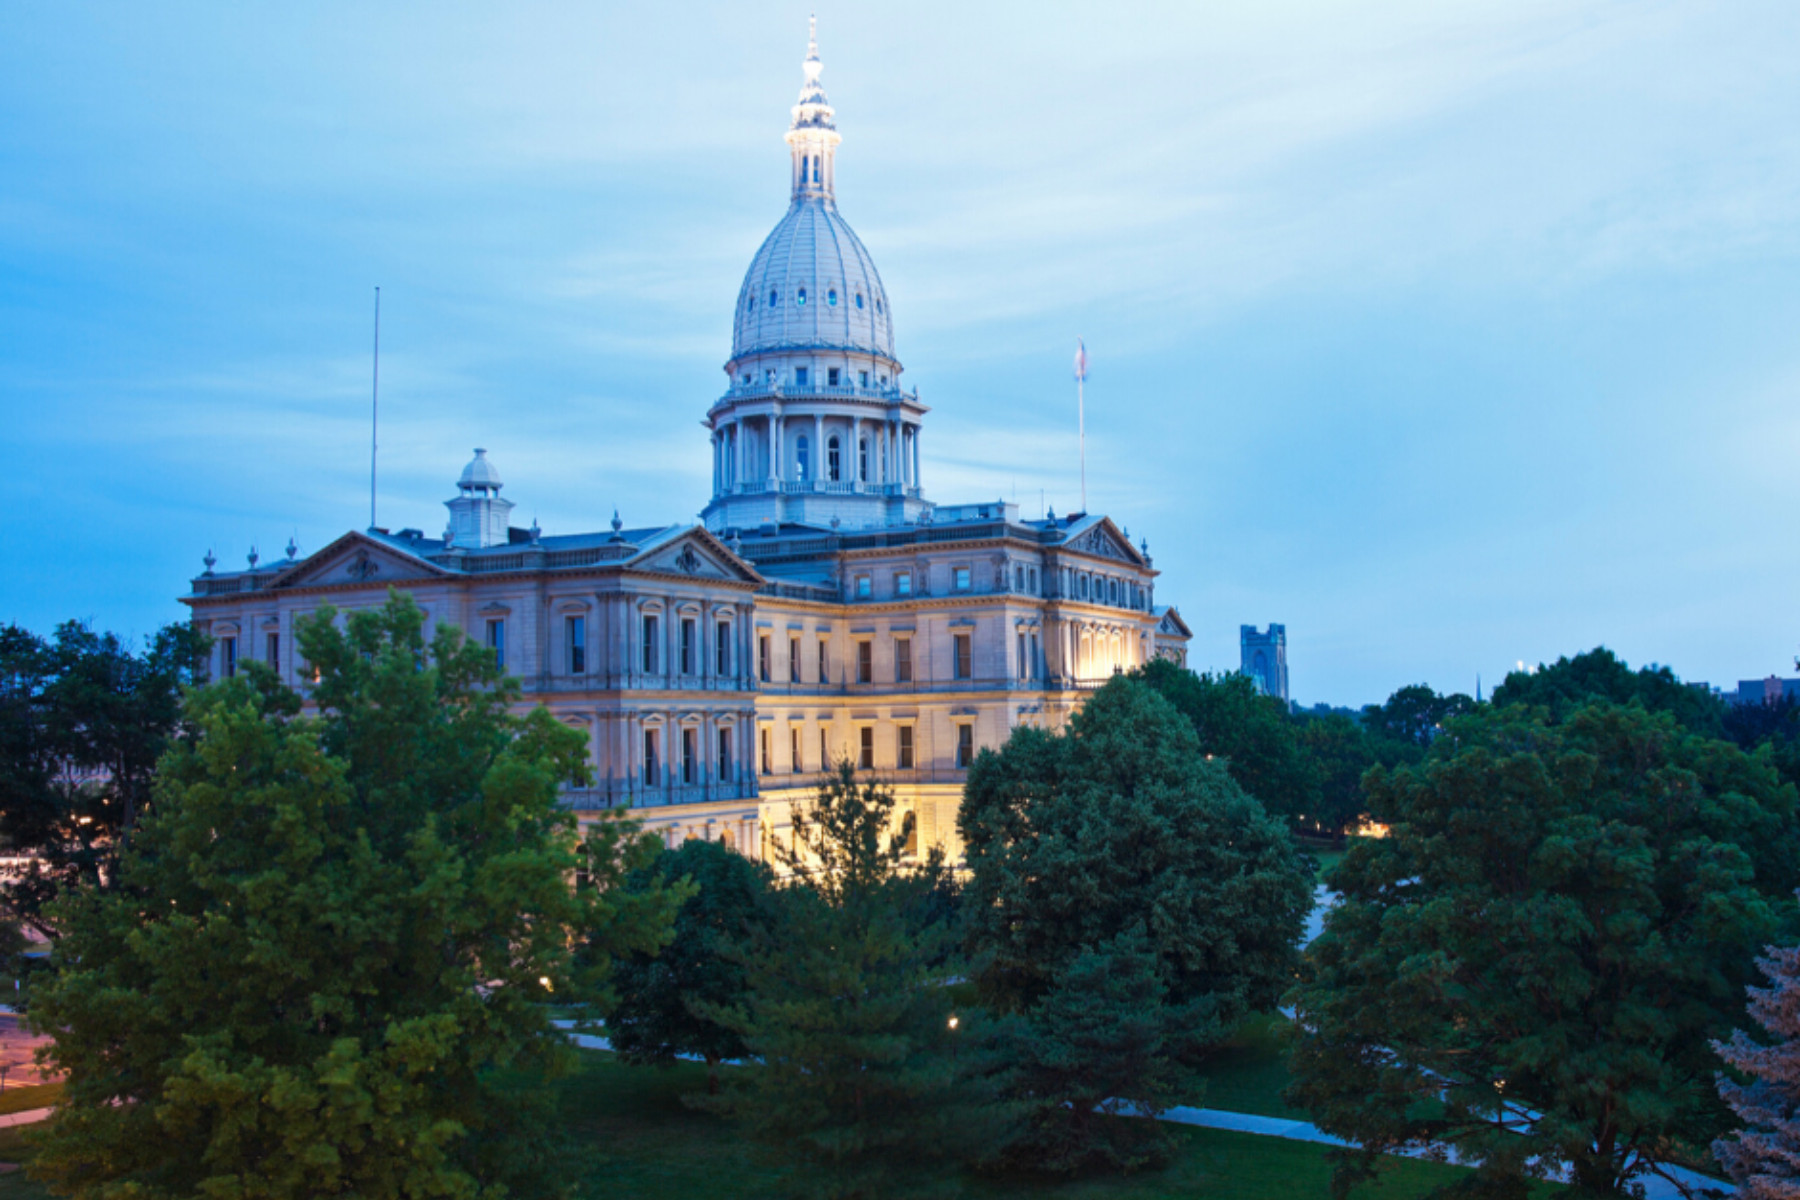 The Capital building in Lansing